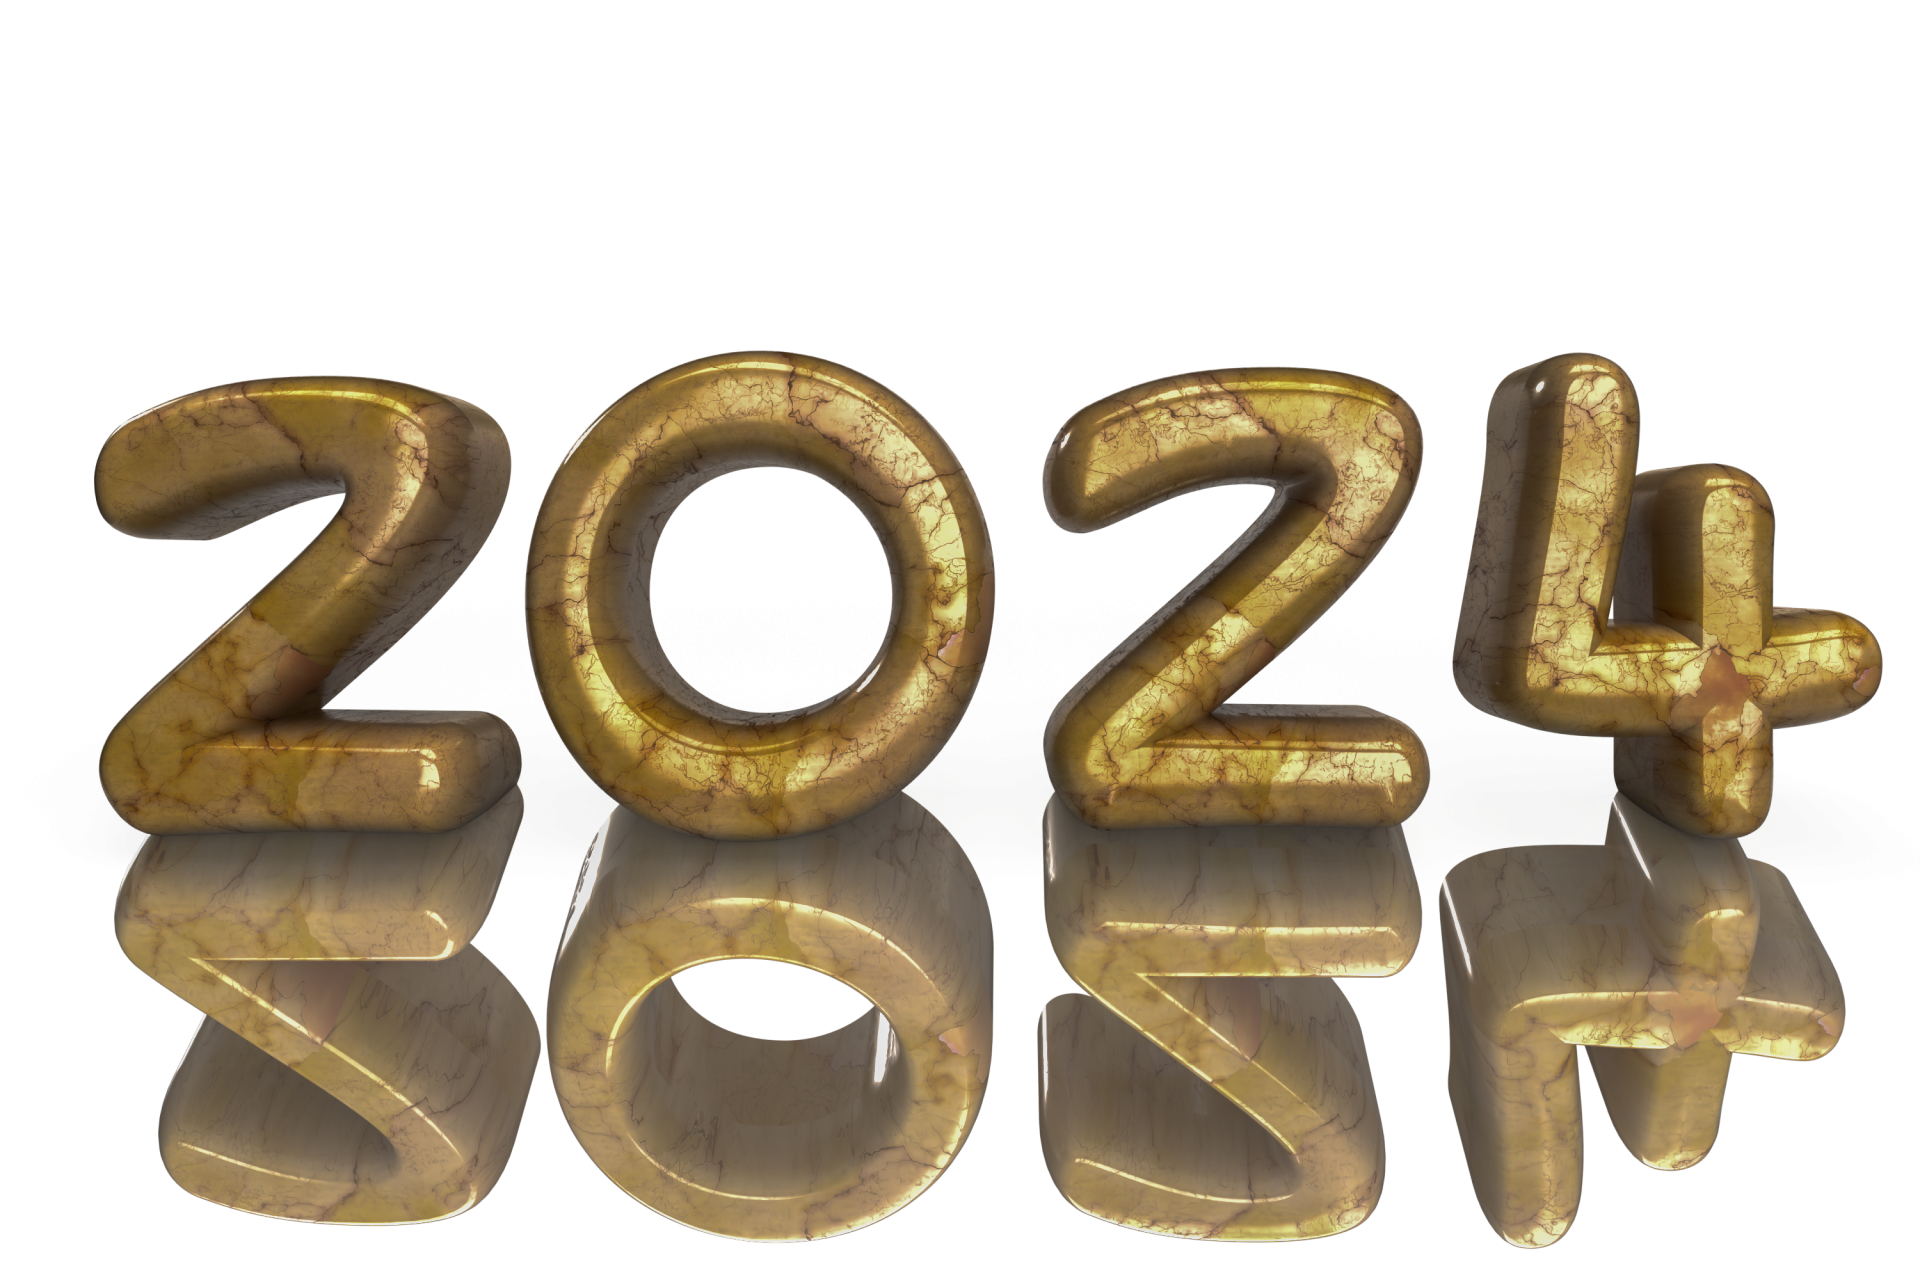 Numbers 2024 In 3D, Png Free Stock Photo - Public Domain Pictures